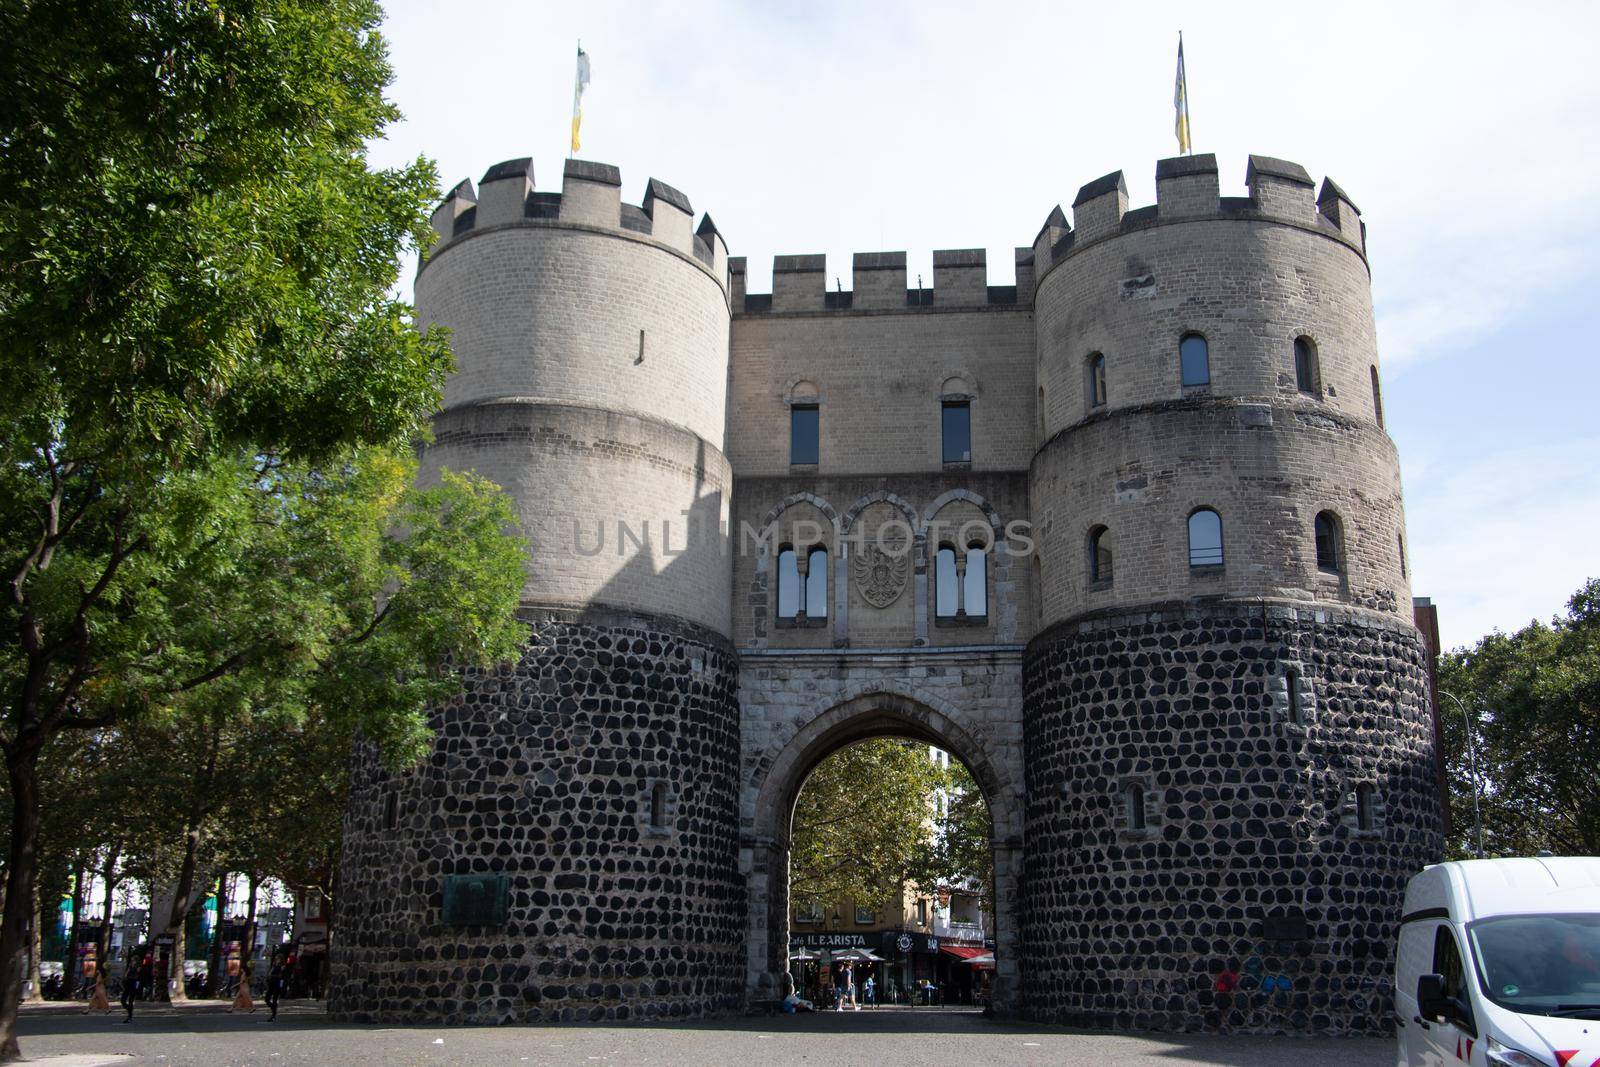 Hahnen city Gate in Cologne